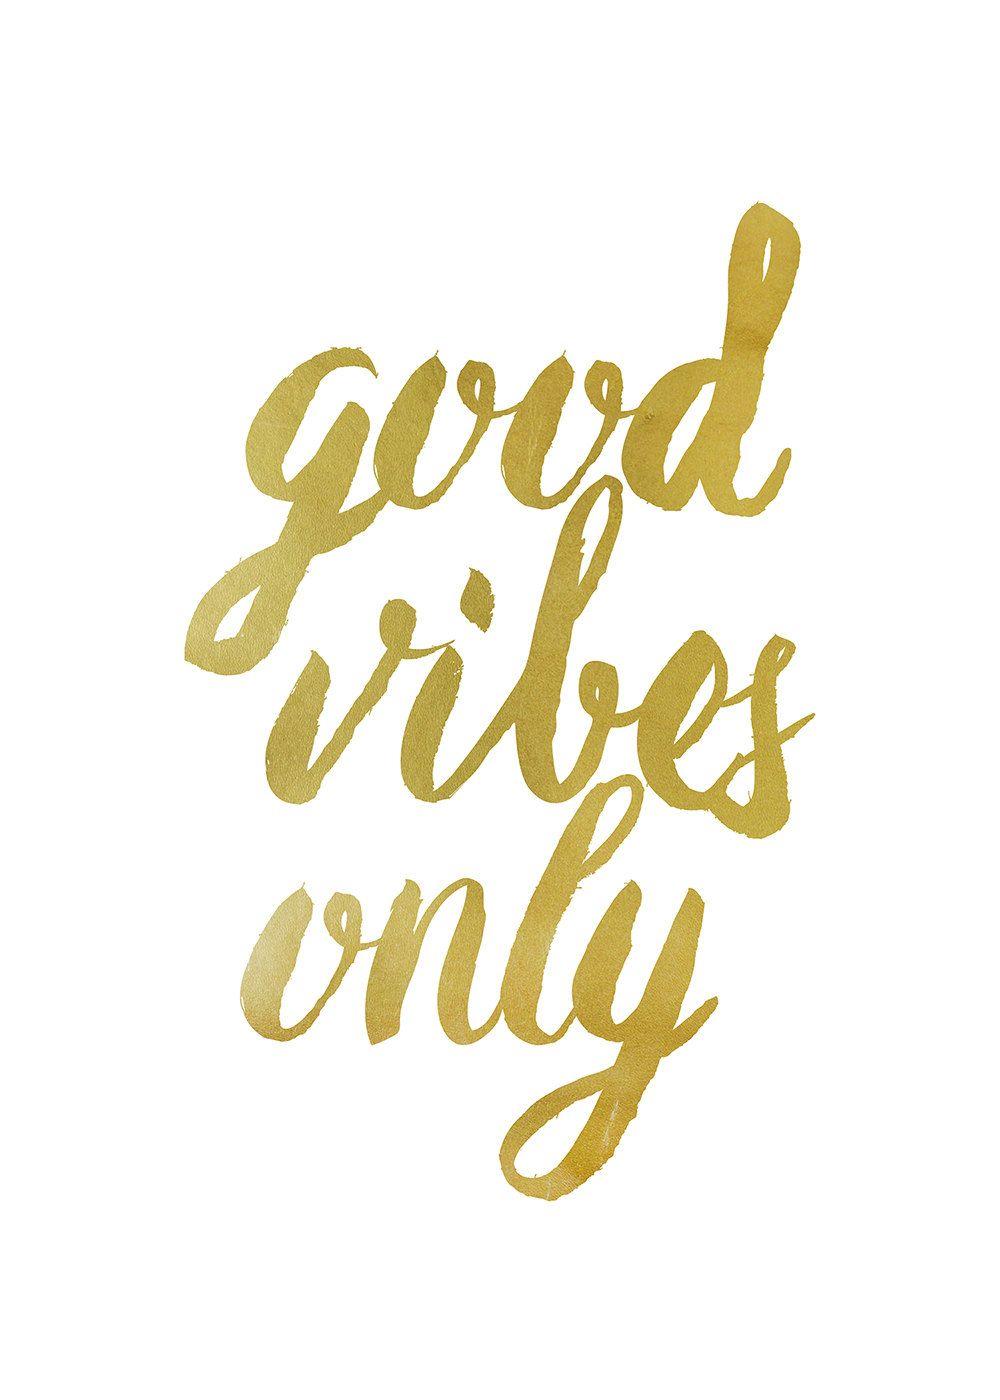 Good Vibes Only Gold Typography Print Inspirational Poster Wall